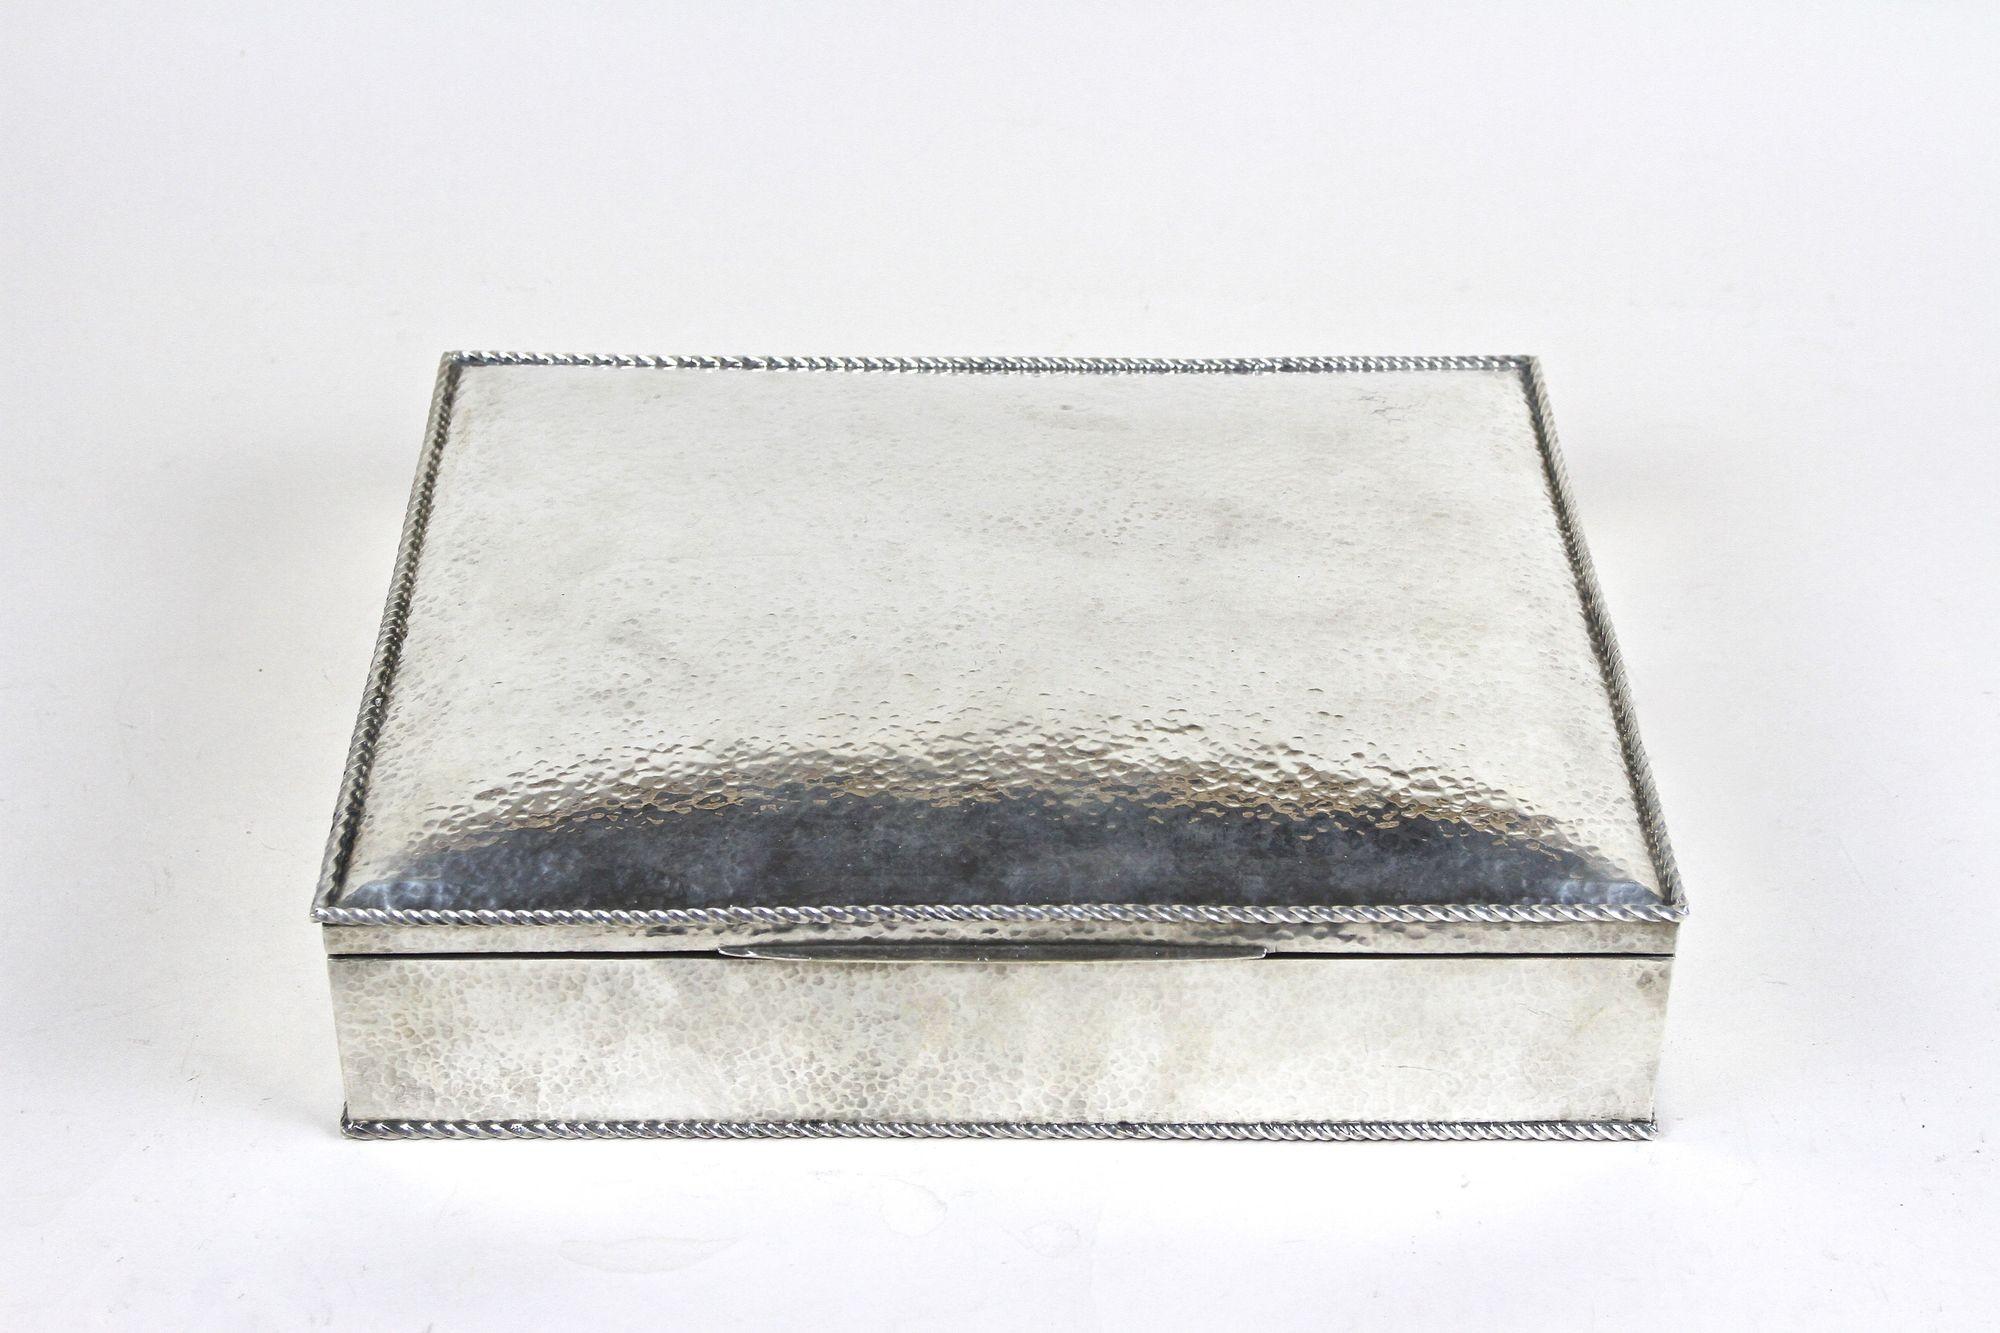 Exquisite Art Nouveau Solid Silver Box/ Jewelry Box from the early 20th century around 1900 in Austria. Artfully made from 60,1 ounces (!) of 900 solid silver, this large precious box impresses with an absolute gorgeous looking hammered surface. The